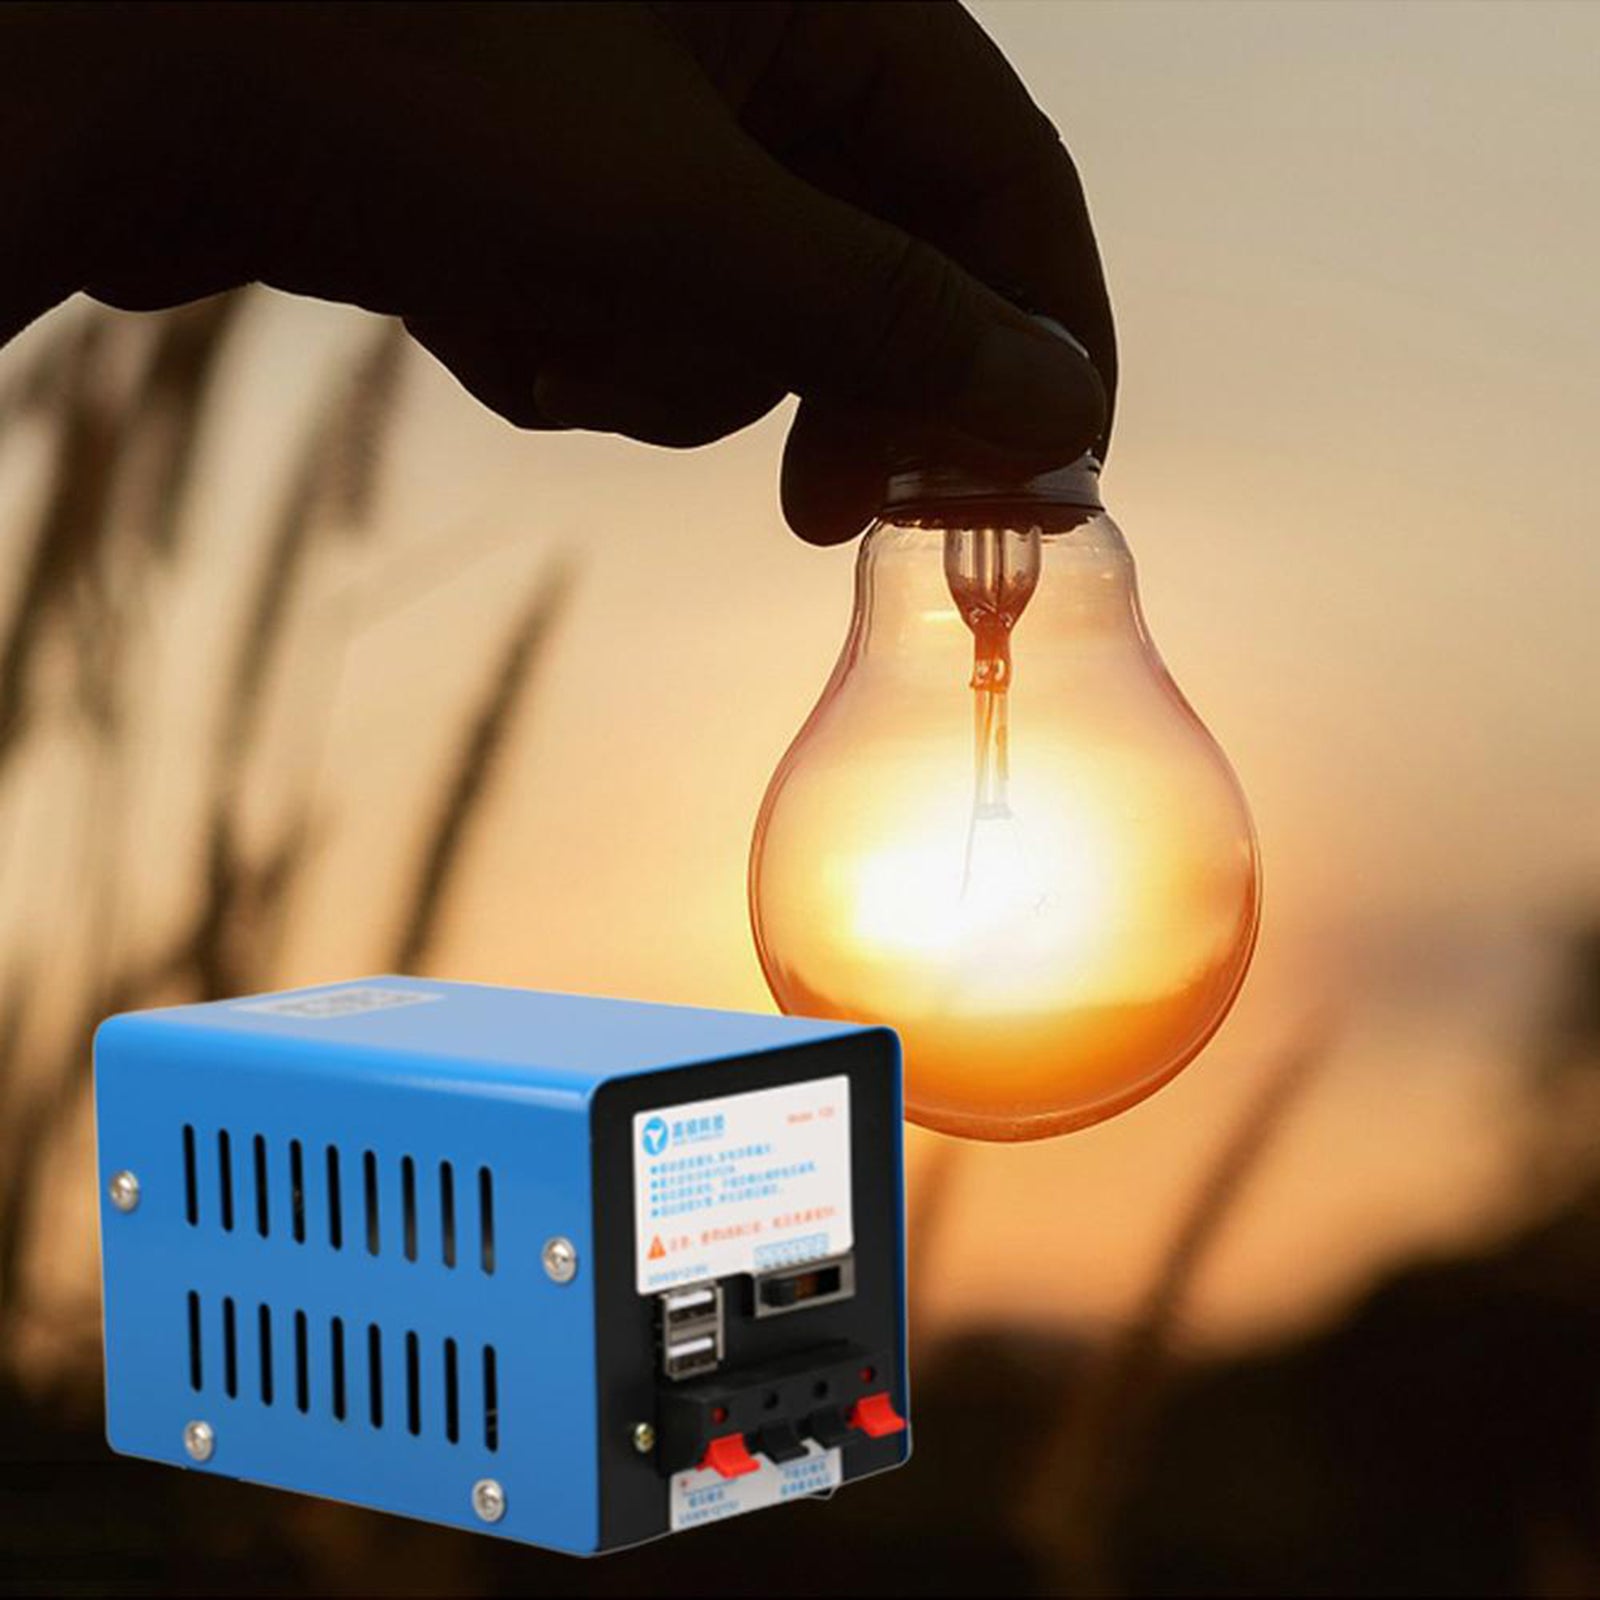 Outdoor Hand Crank Generator Dynamo USB Charger for Travel Camping Hiking